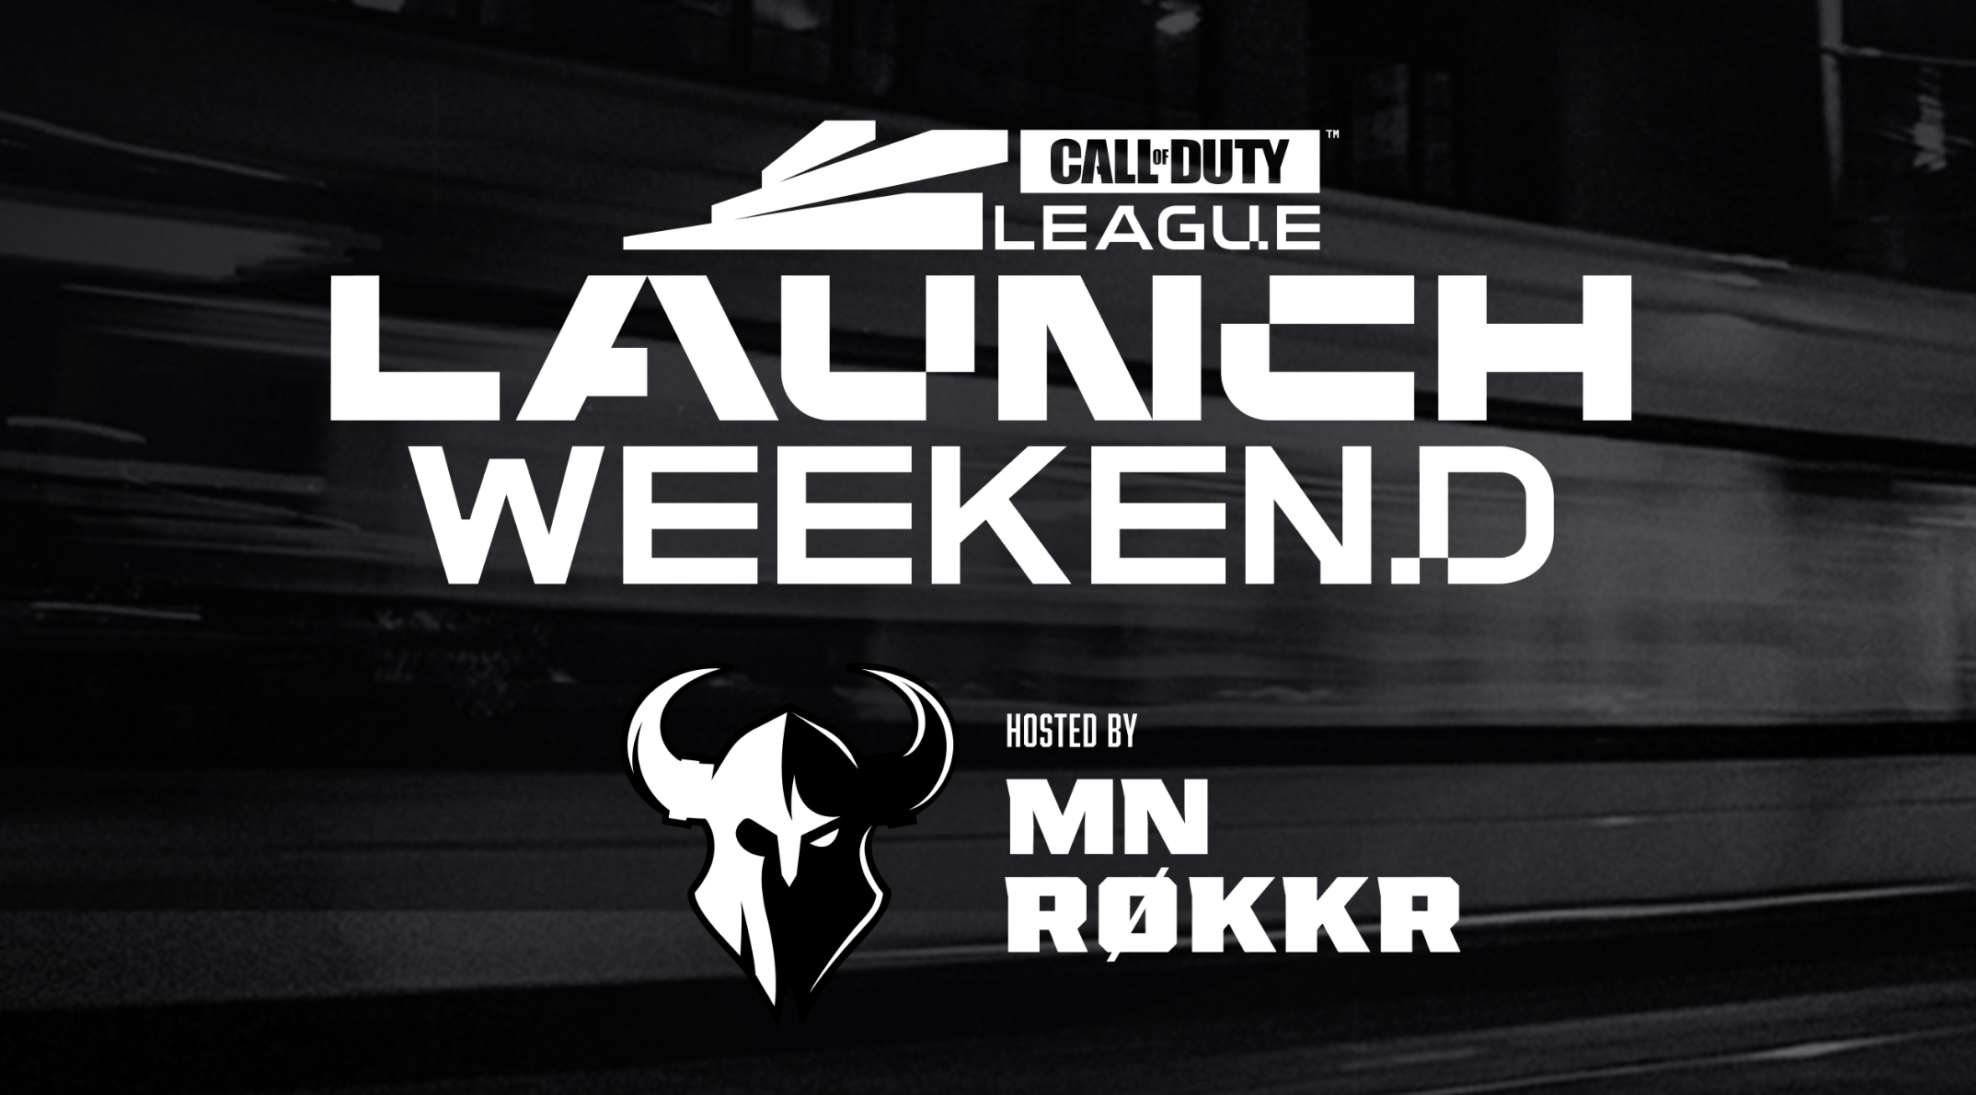 Minnesota ROKKR will host the launch weekend of the CDL.